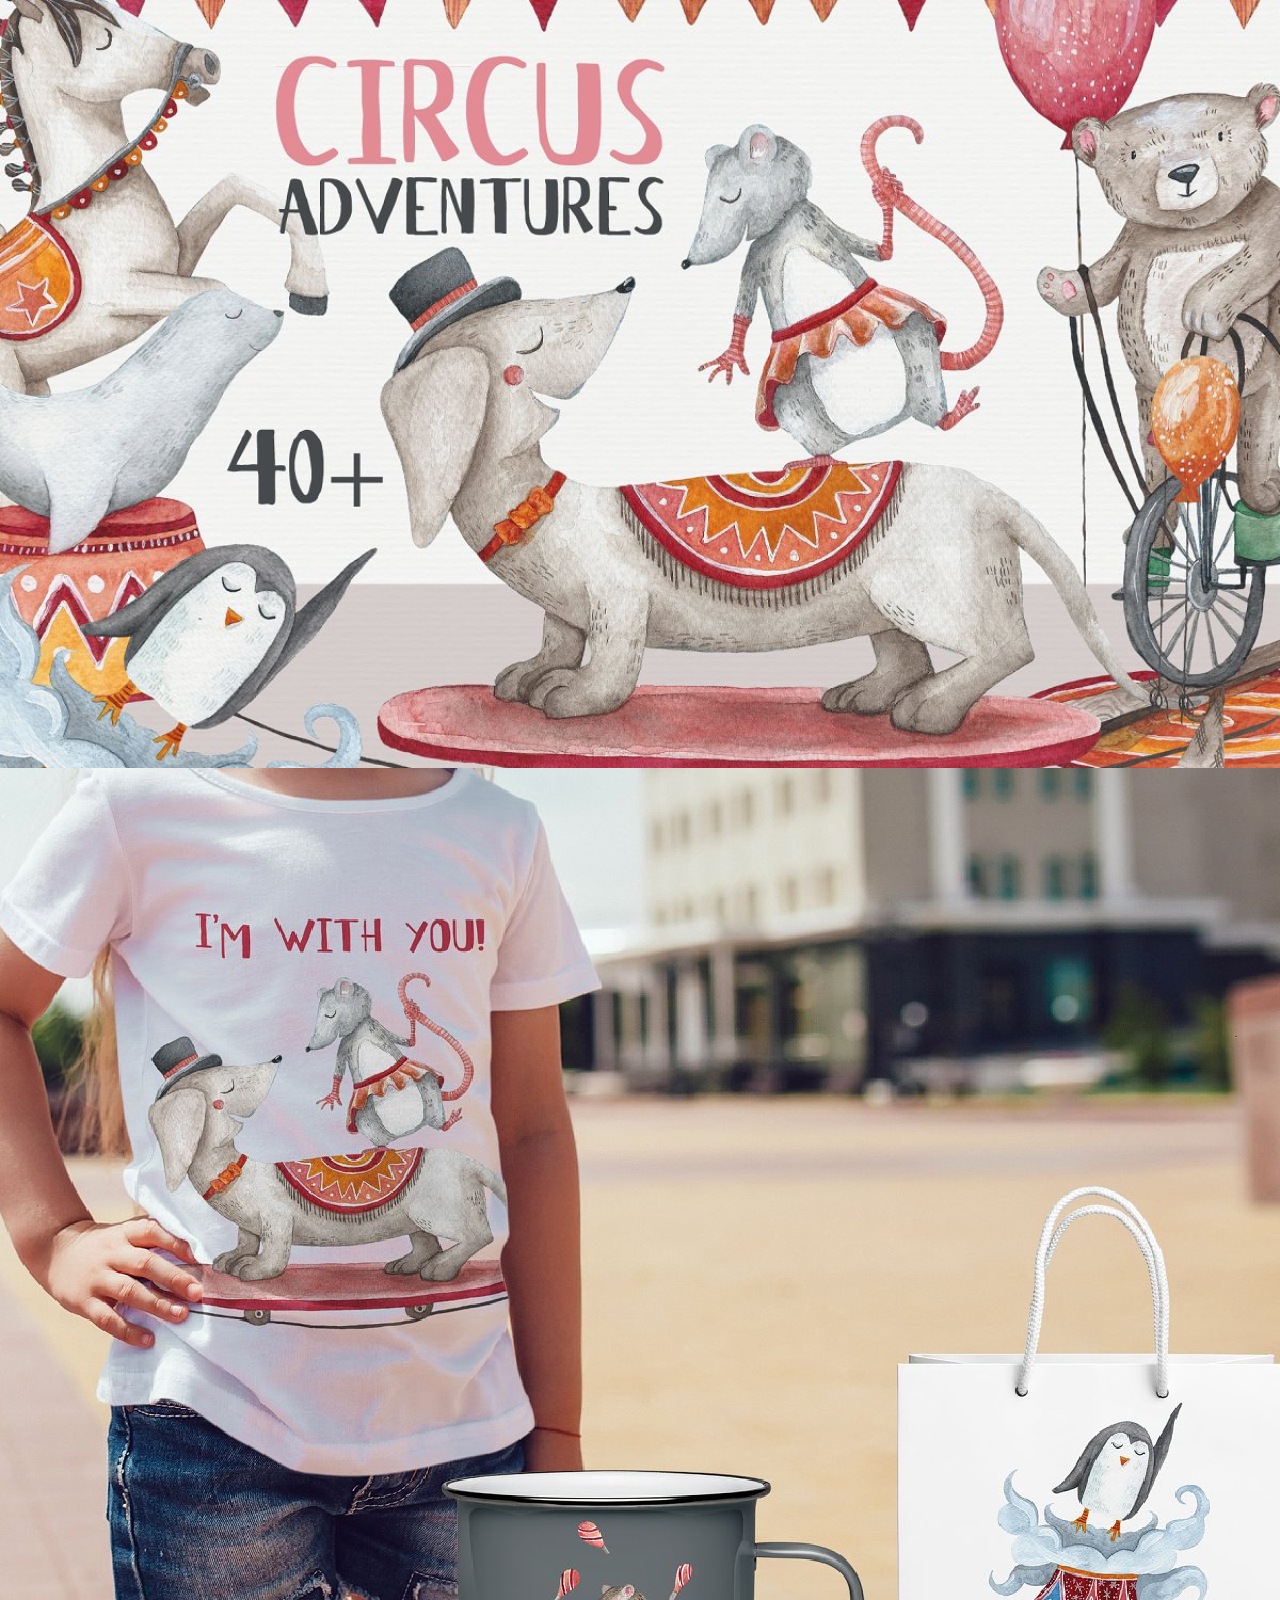 Circus adventures graphics pinterest image preview.